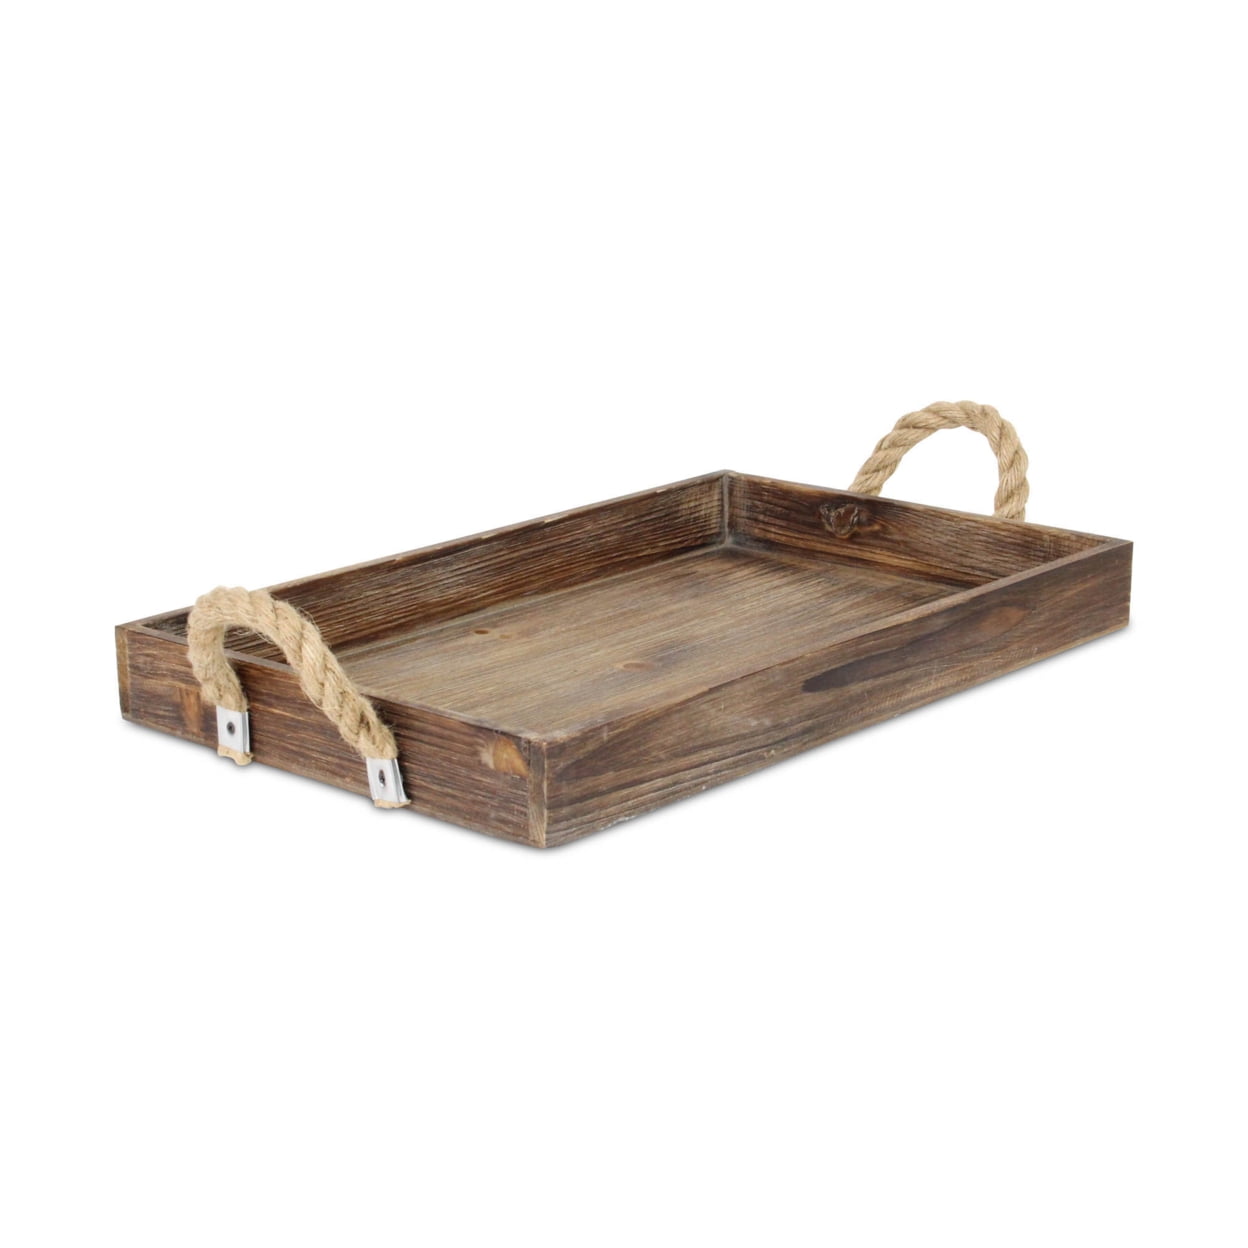 5599dbr Wooden Tray With Side Rope Handles, Dark Brown